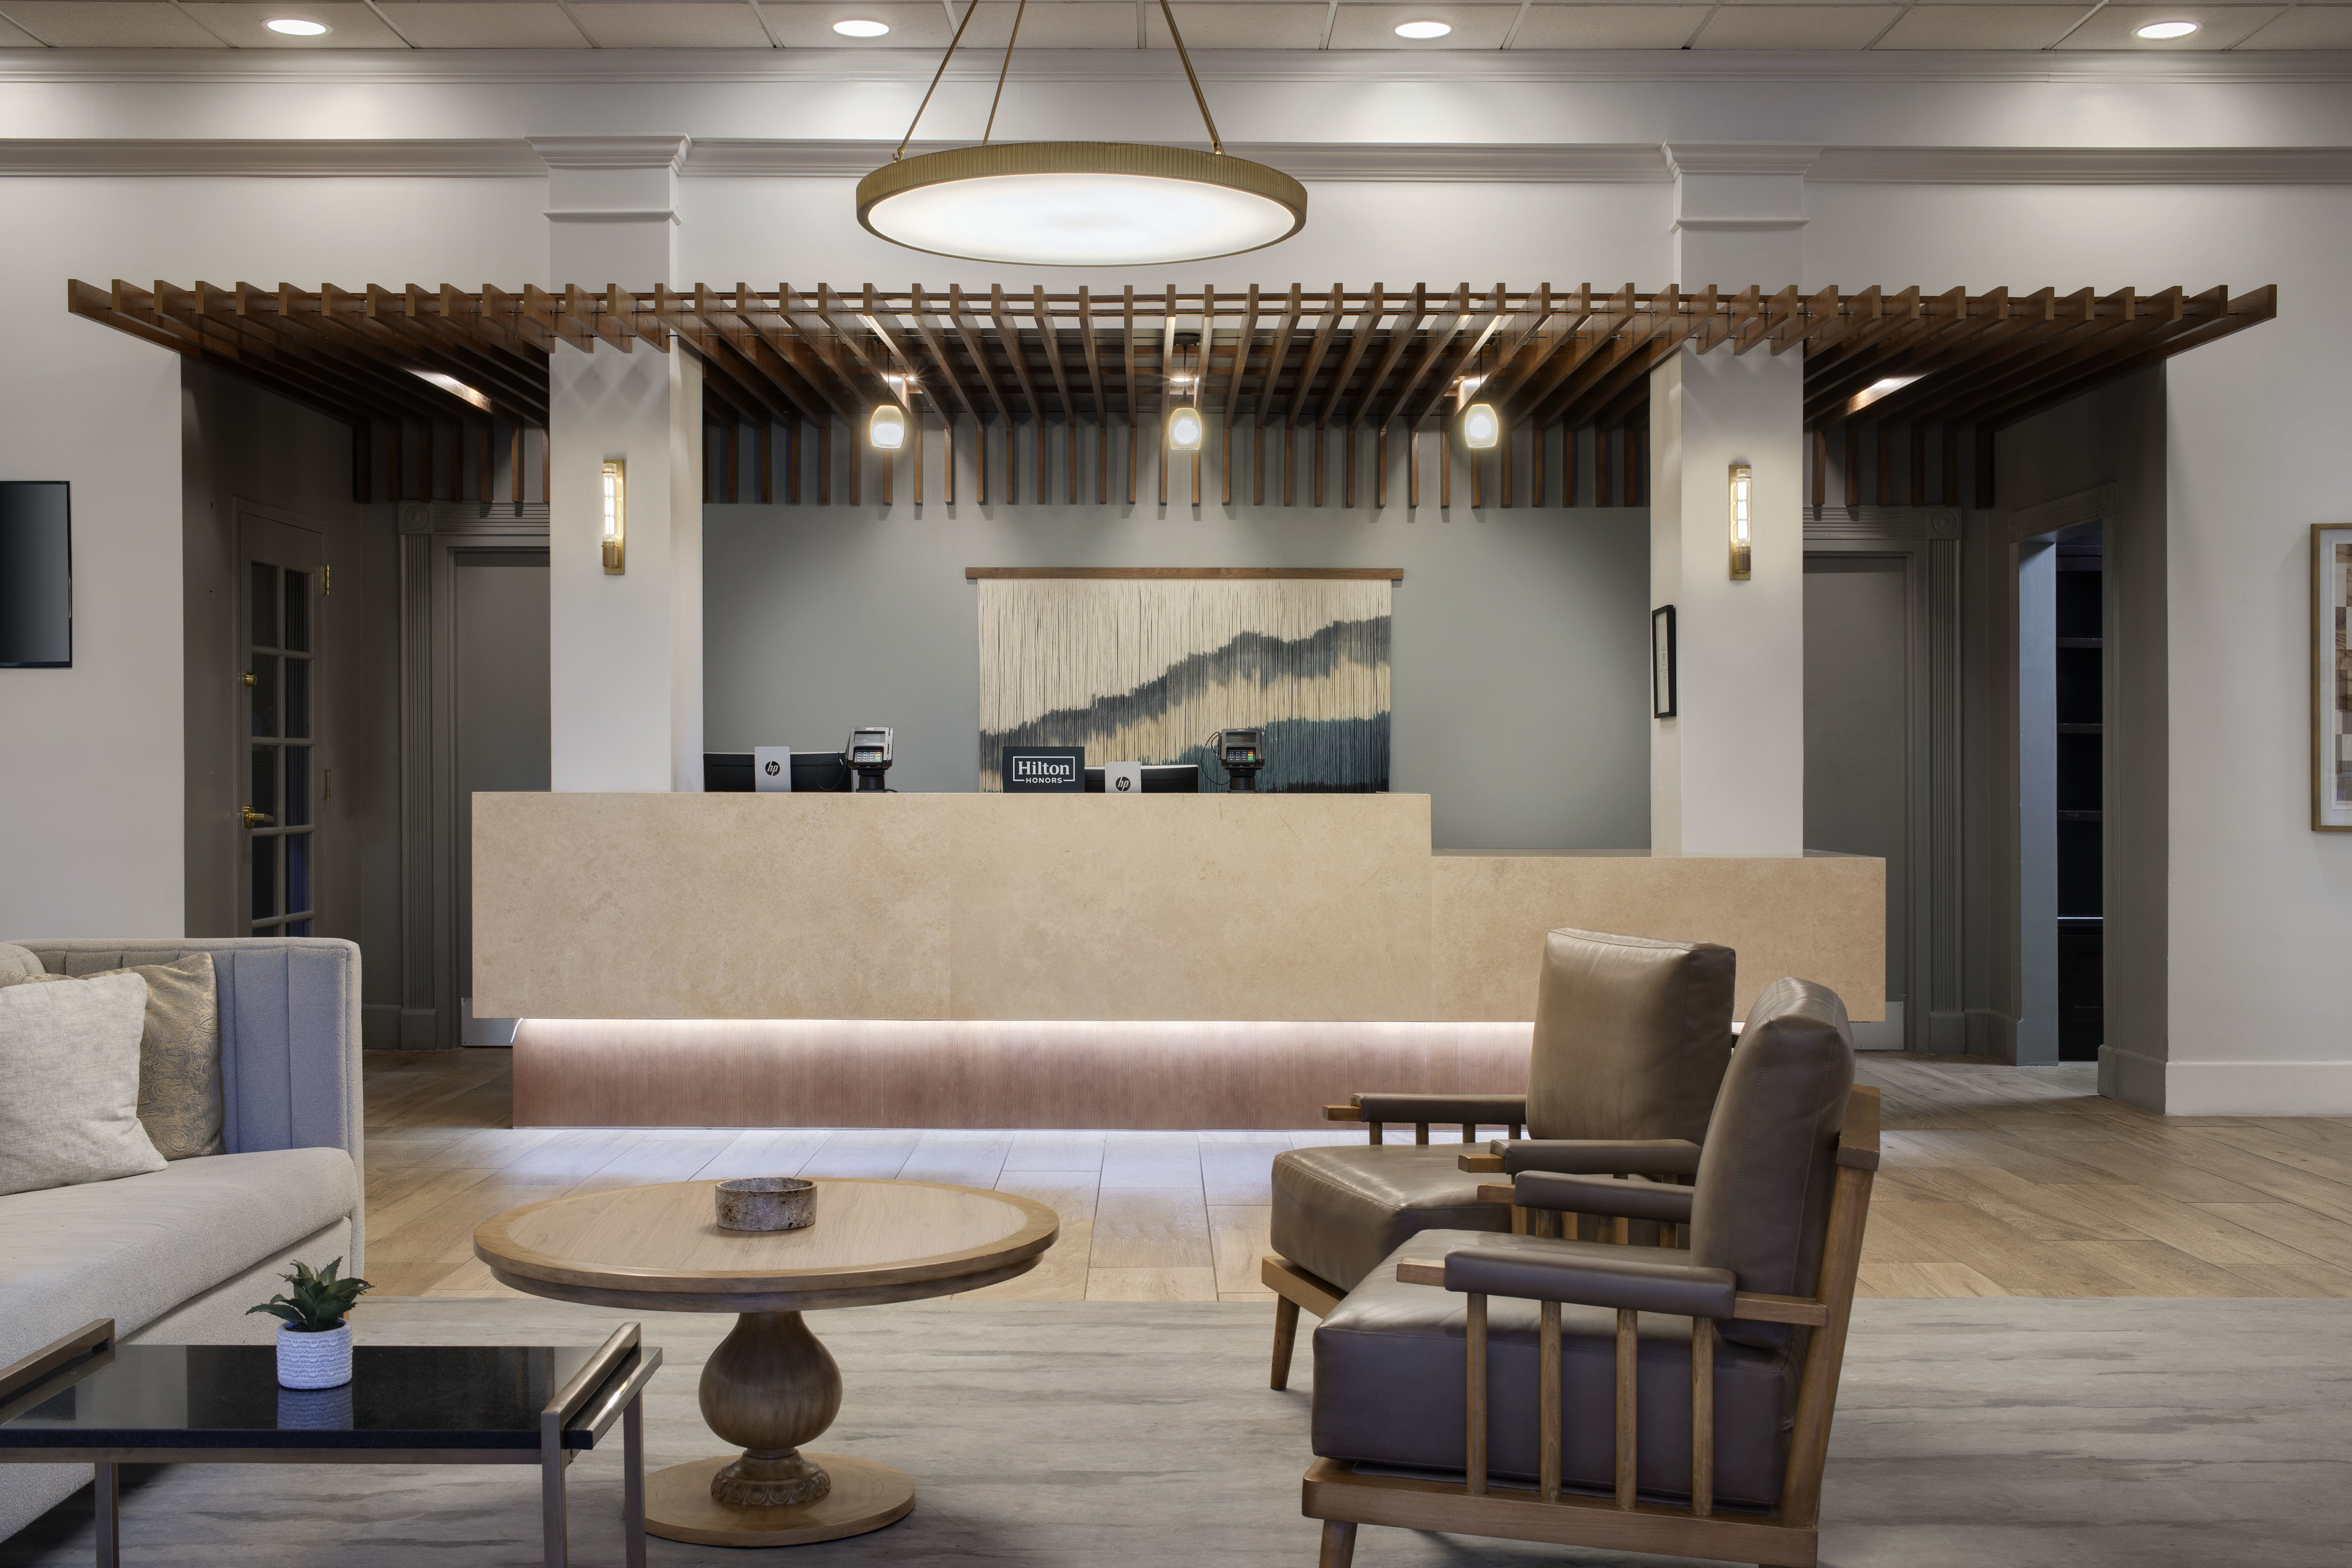 Reception Desk and Seating Area in Lobby